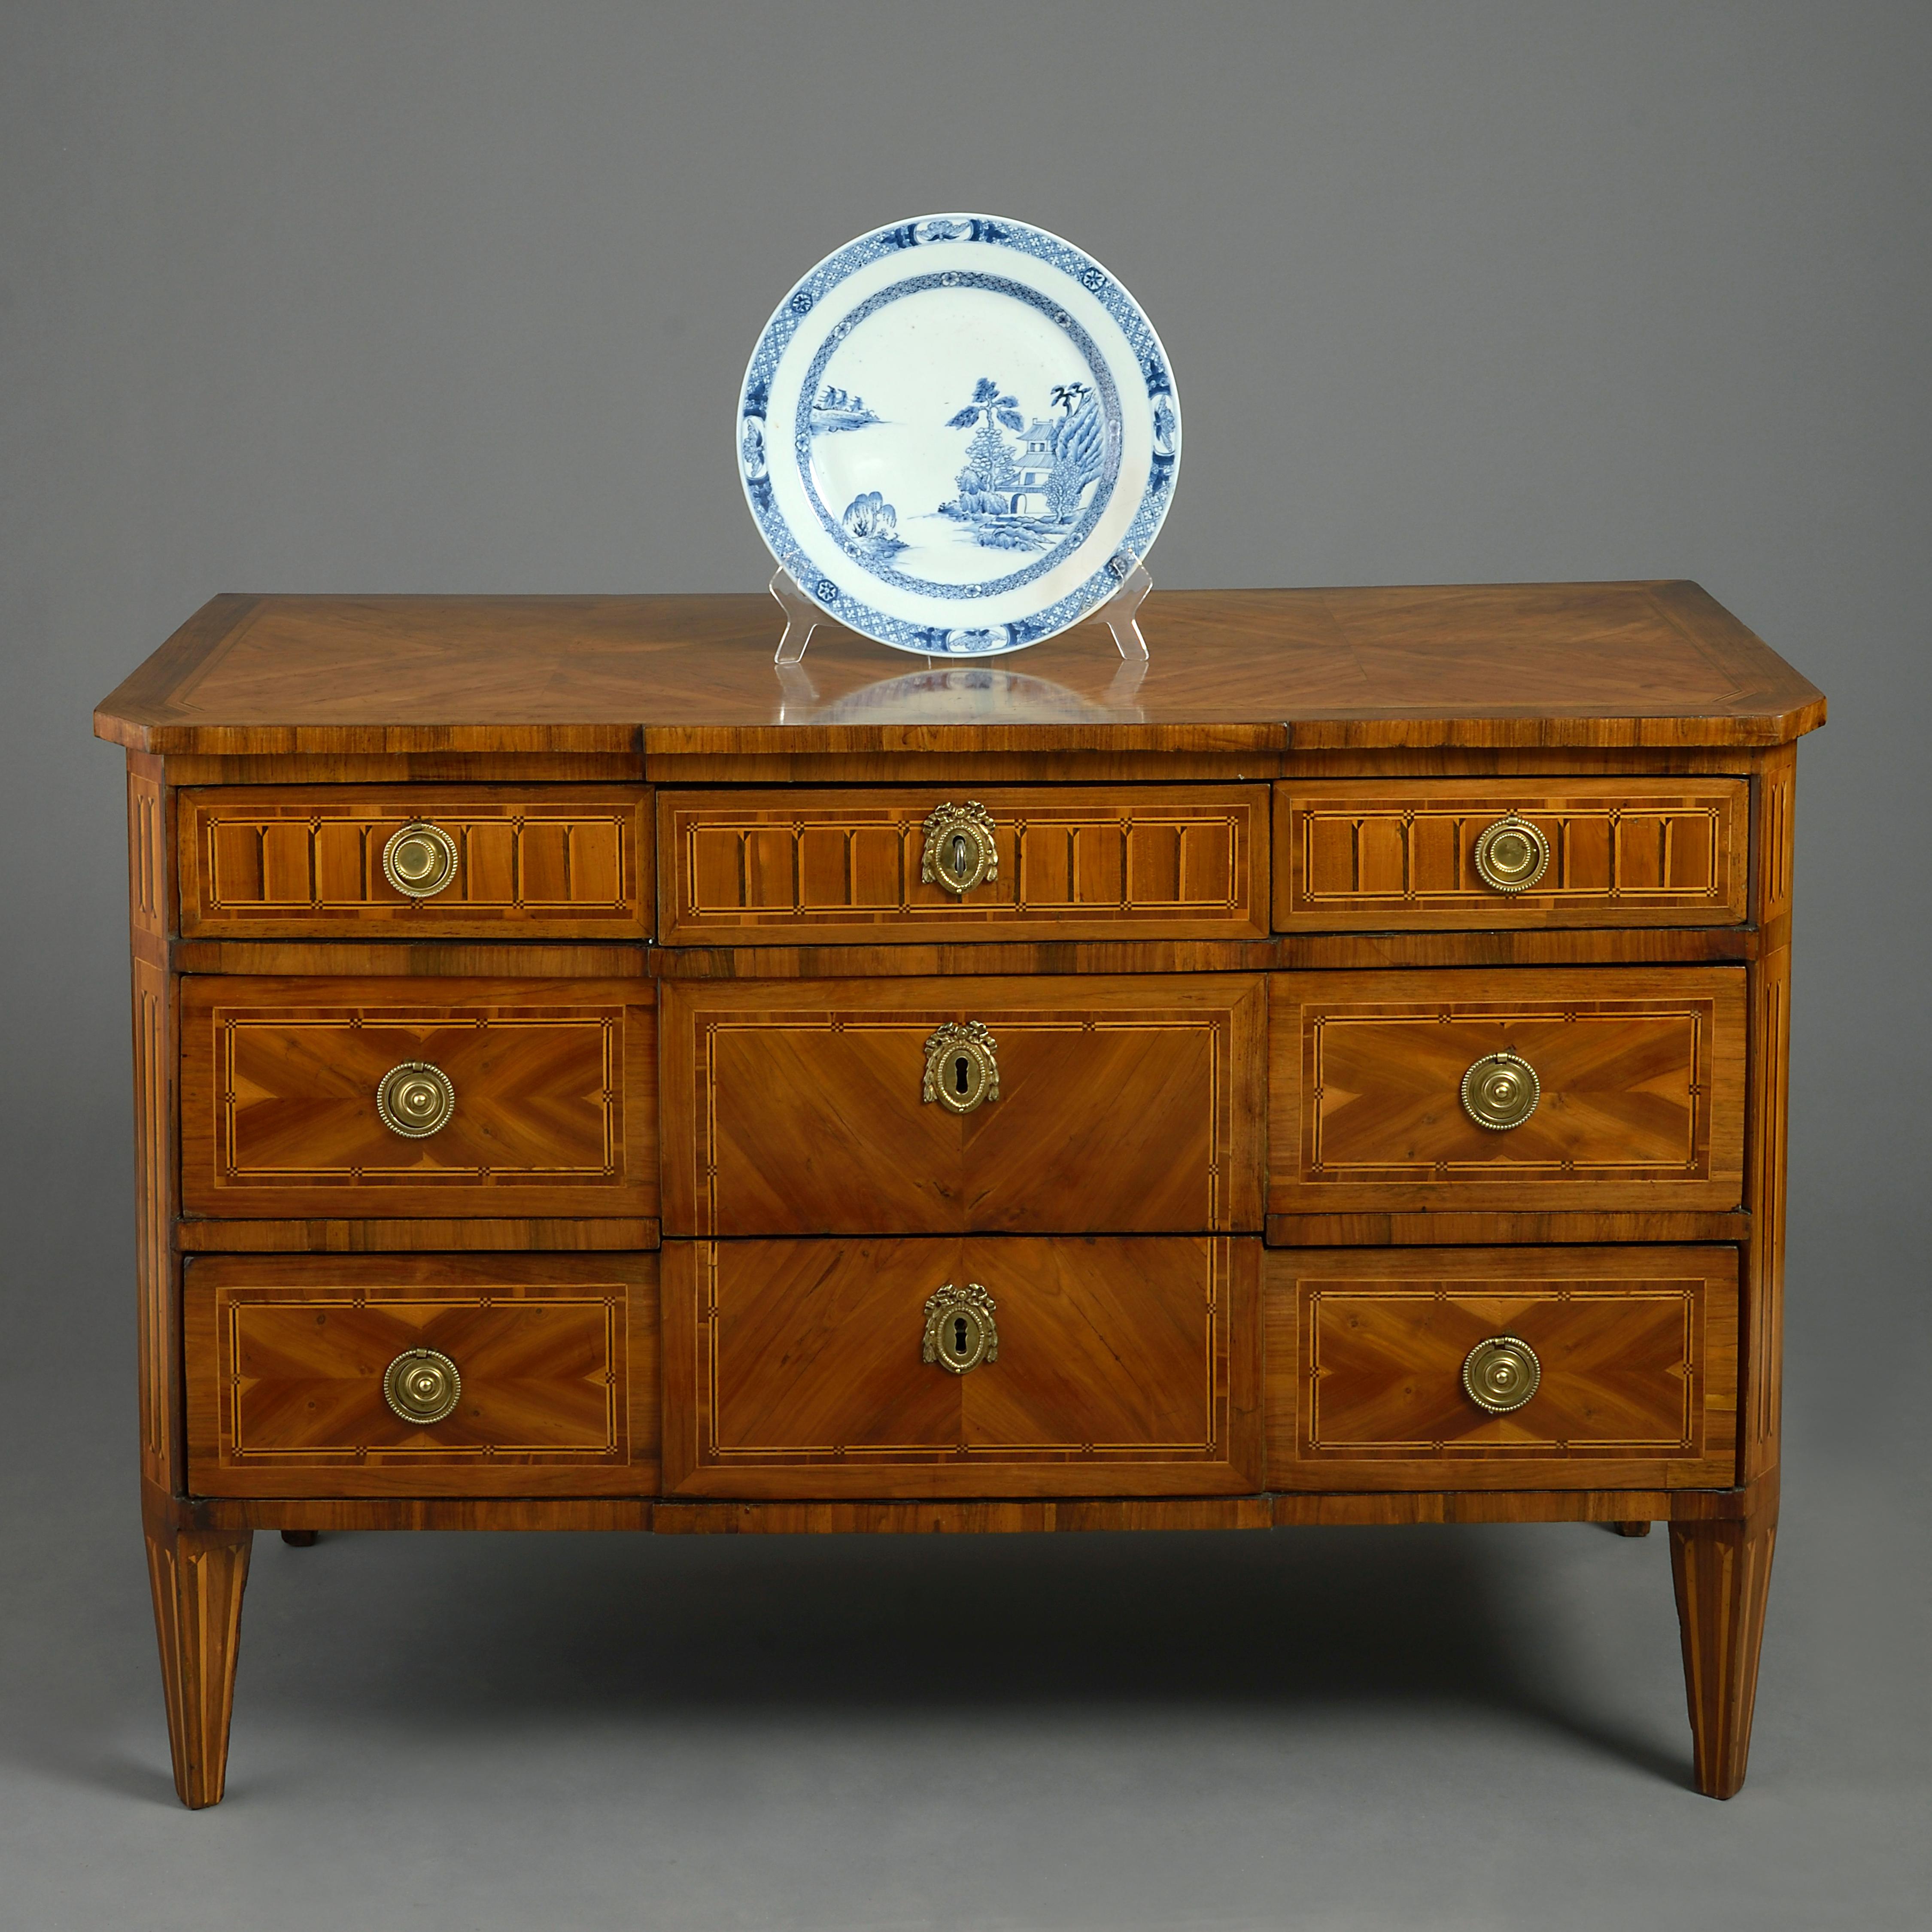 A fine late 18th century parquetry commode veneered throughout in amaranth, walnut, ebony and boxwood, the overhanging geometric top above a carcass with broken front of three drawers with stringing and inlay, all raised on square tapering feet of